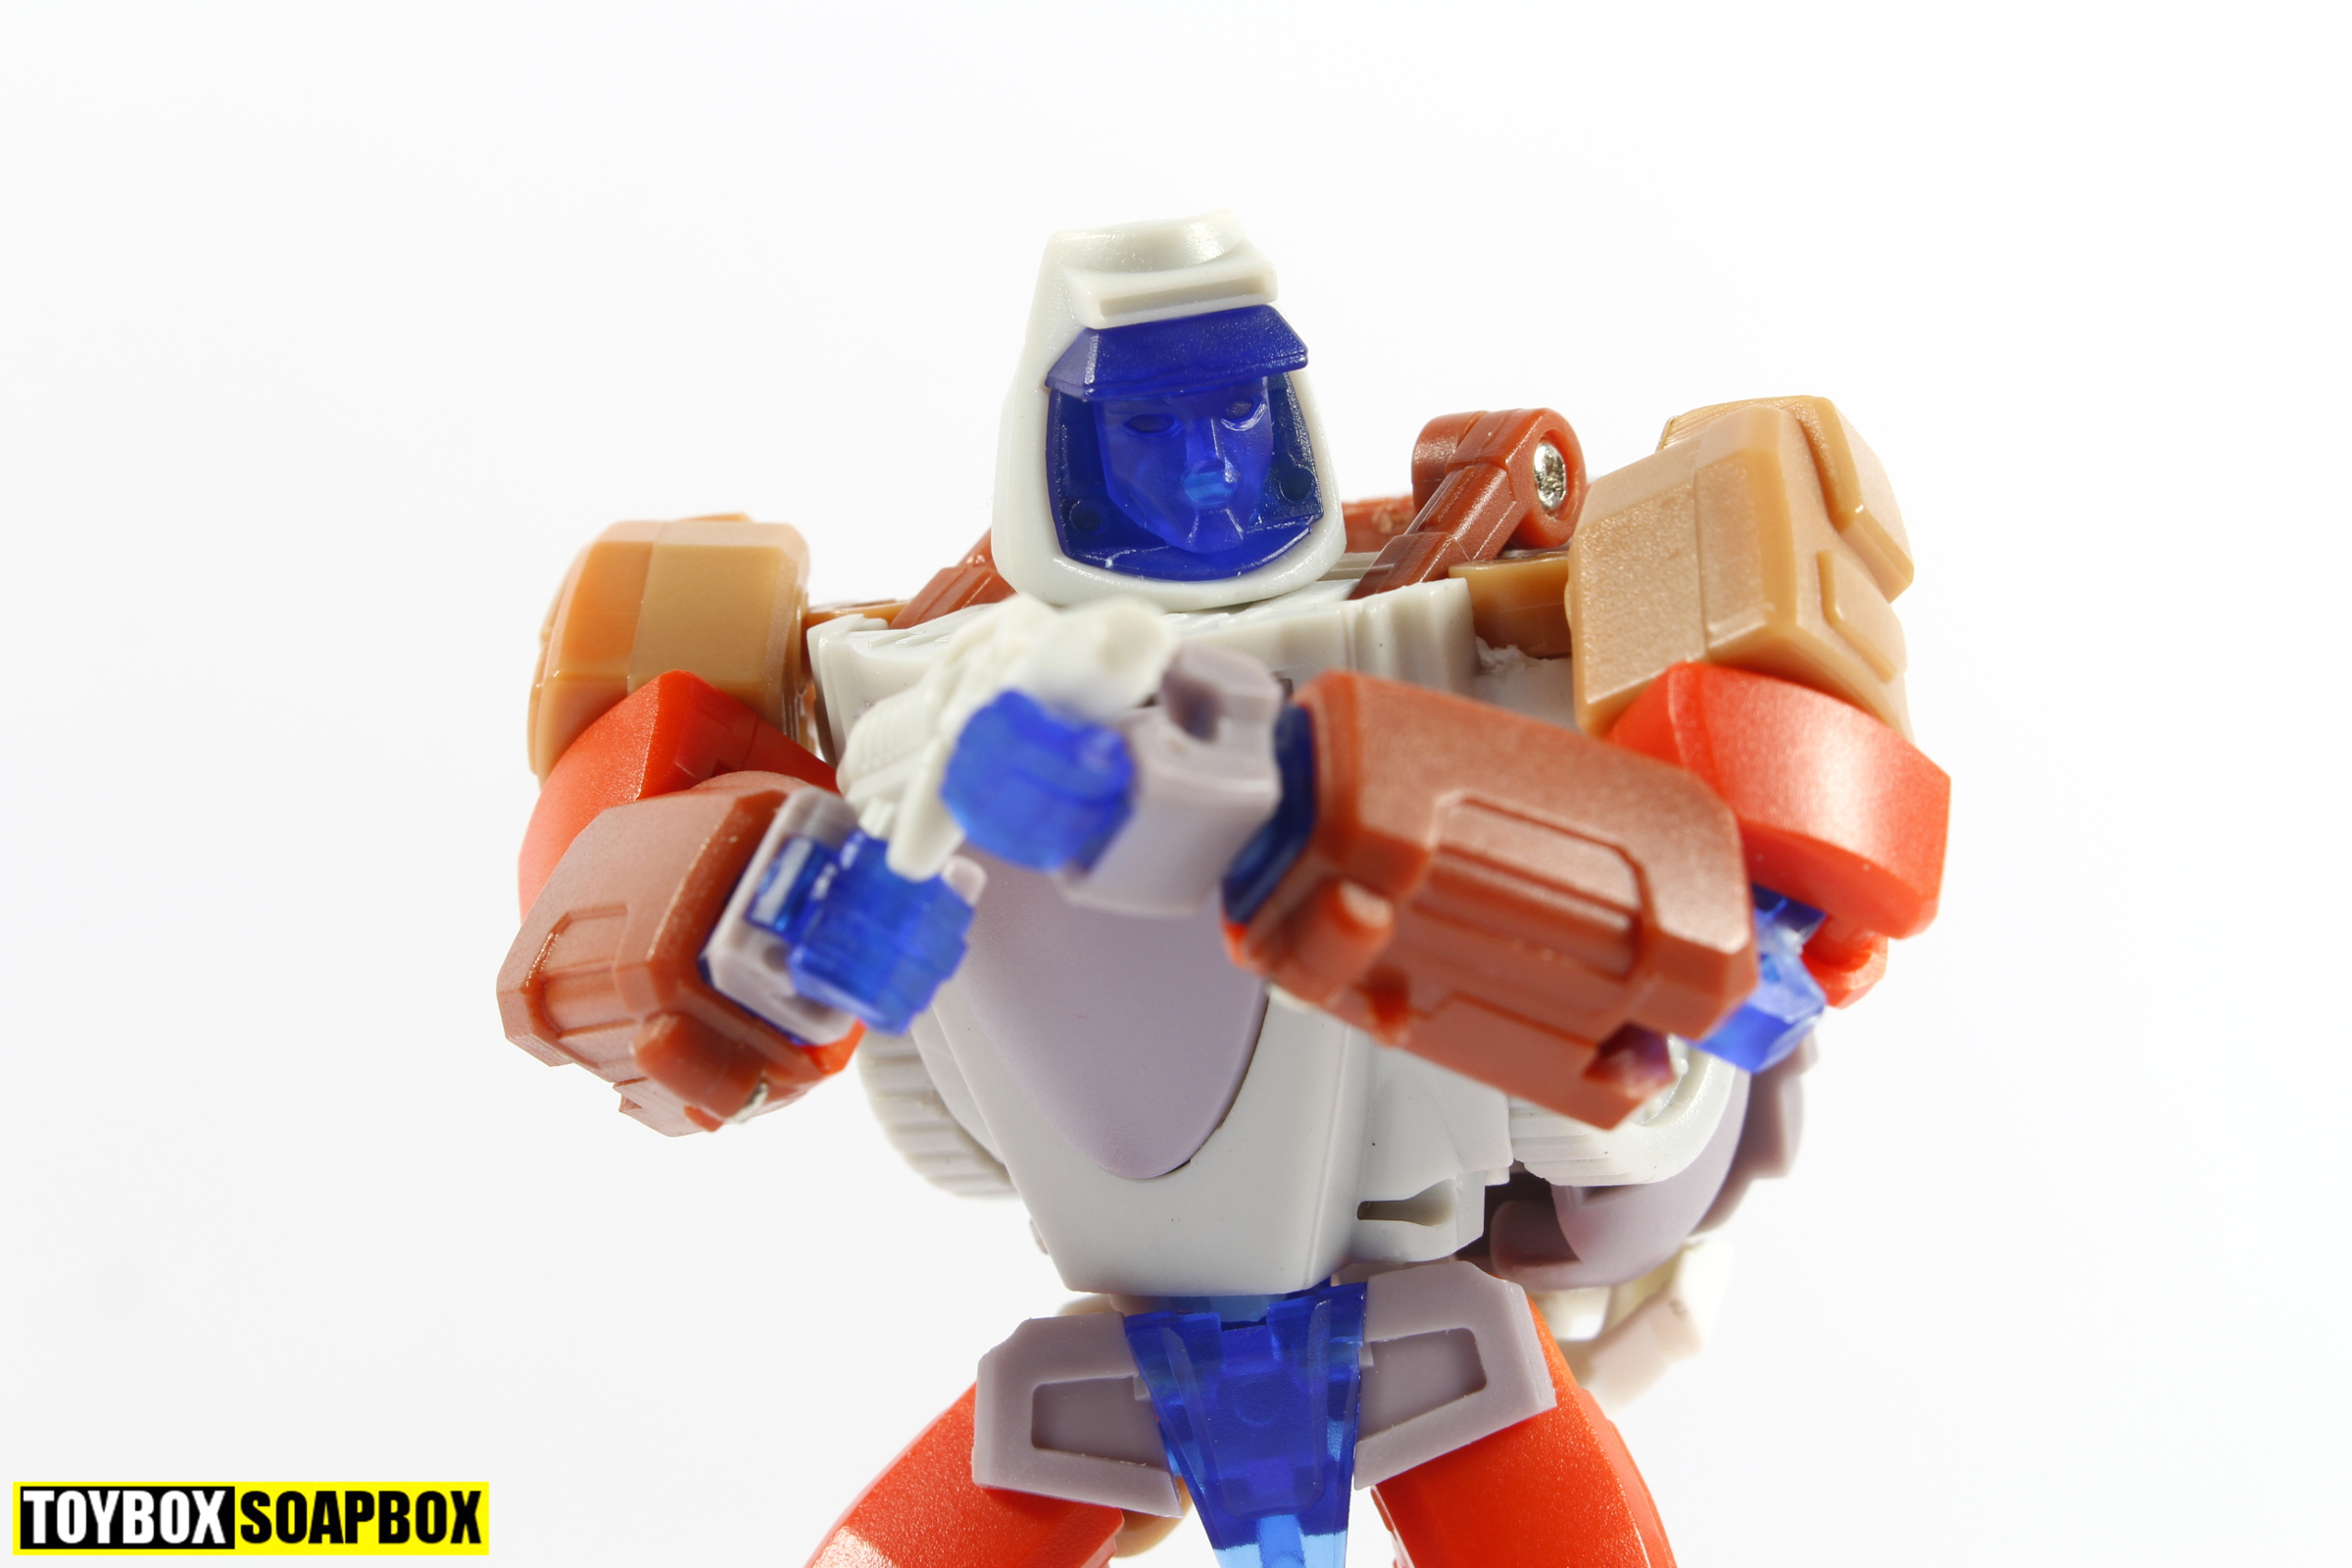 x-transbots ollie v2 review